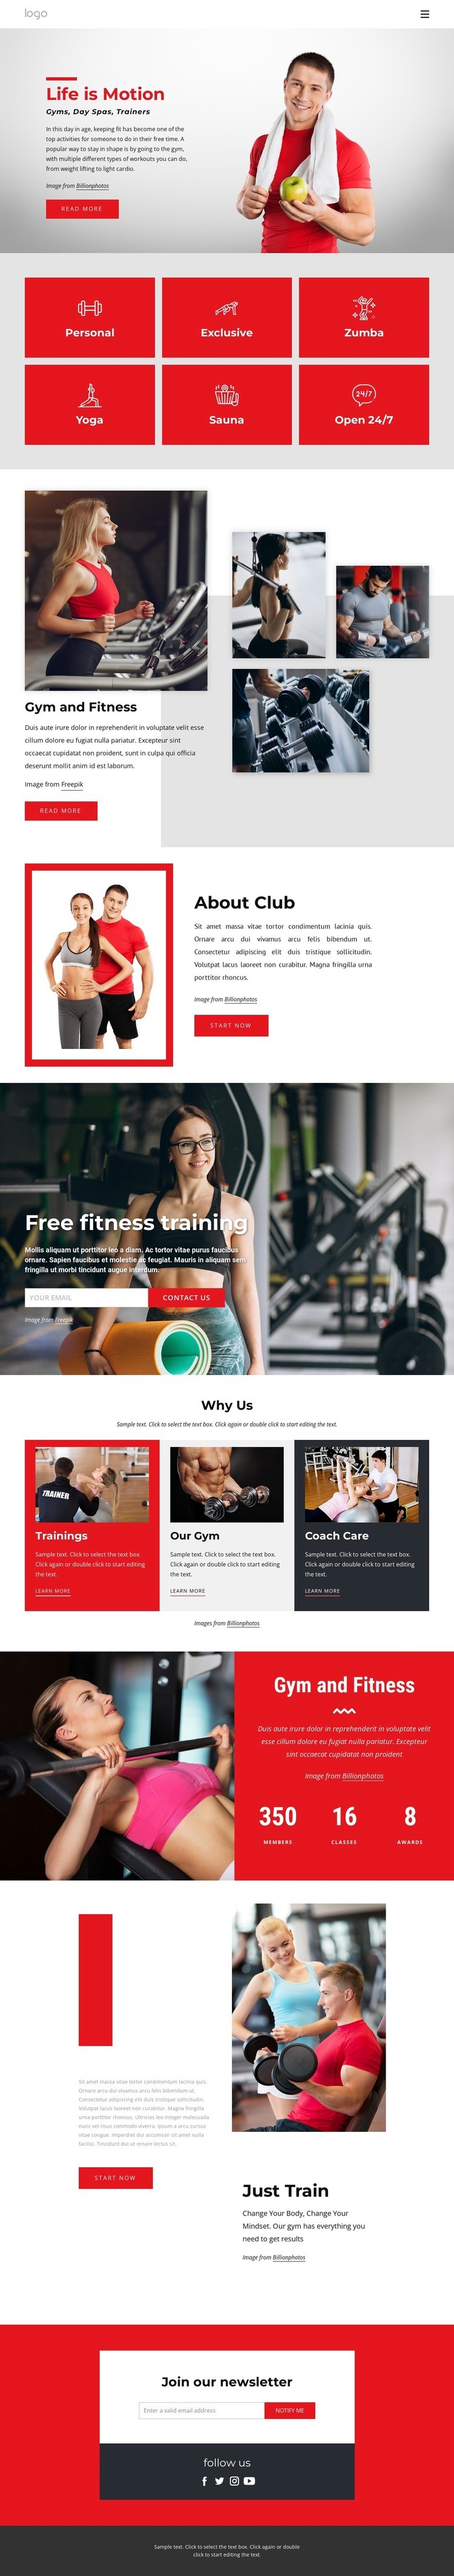 The best sport club Web Page Design